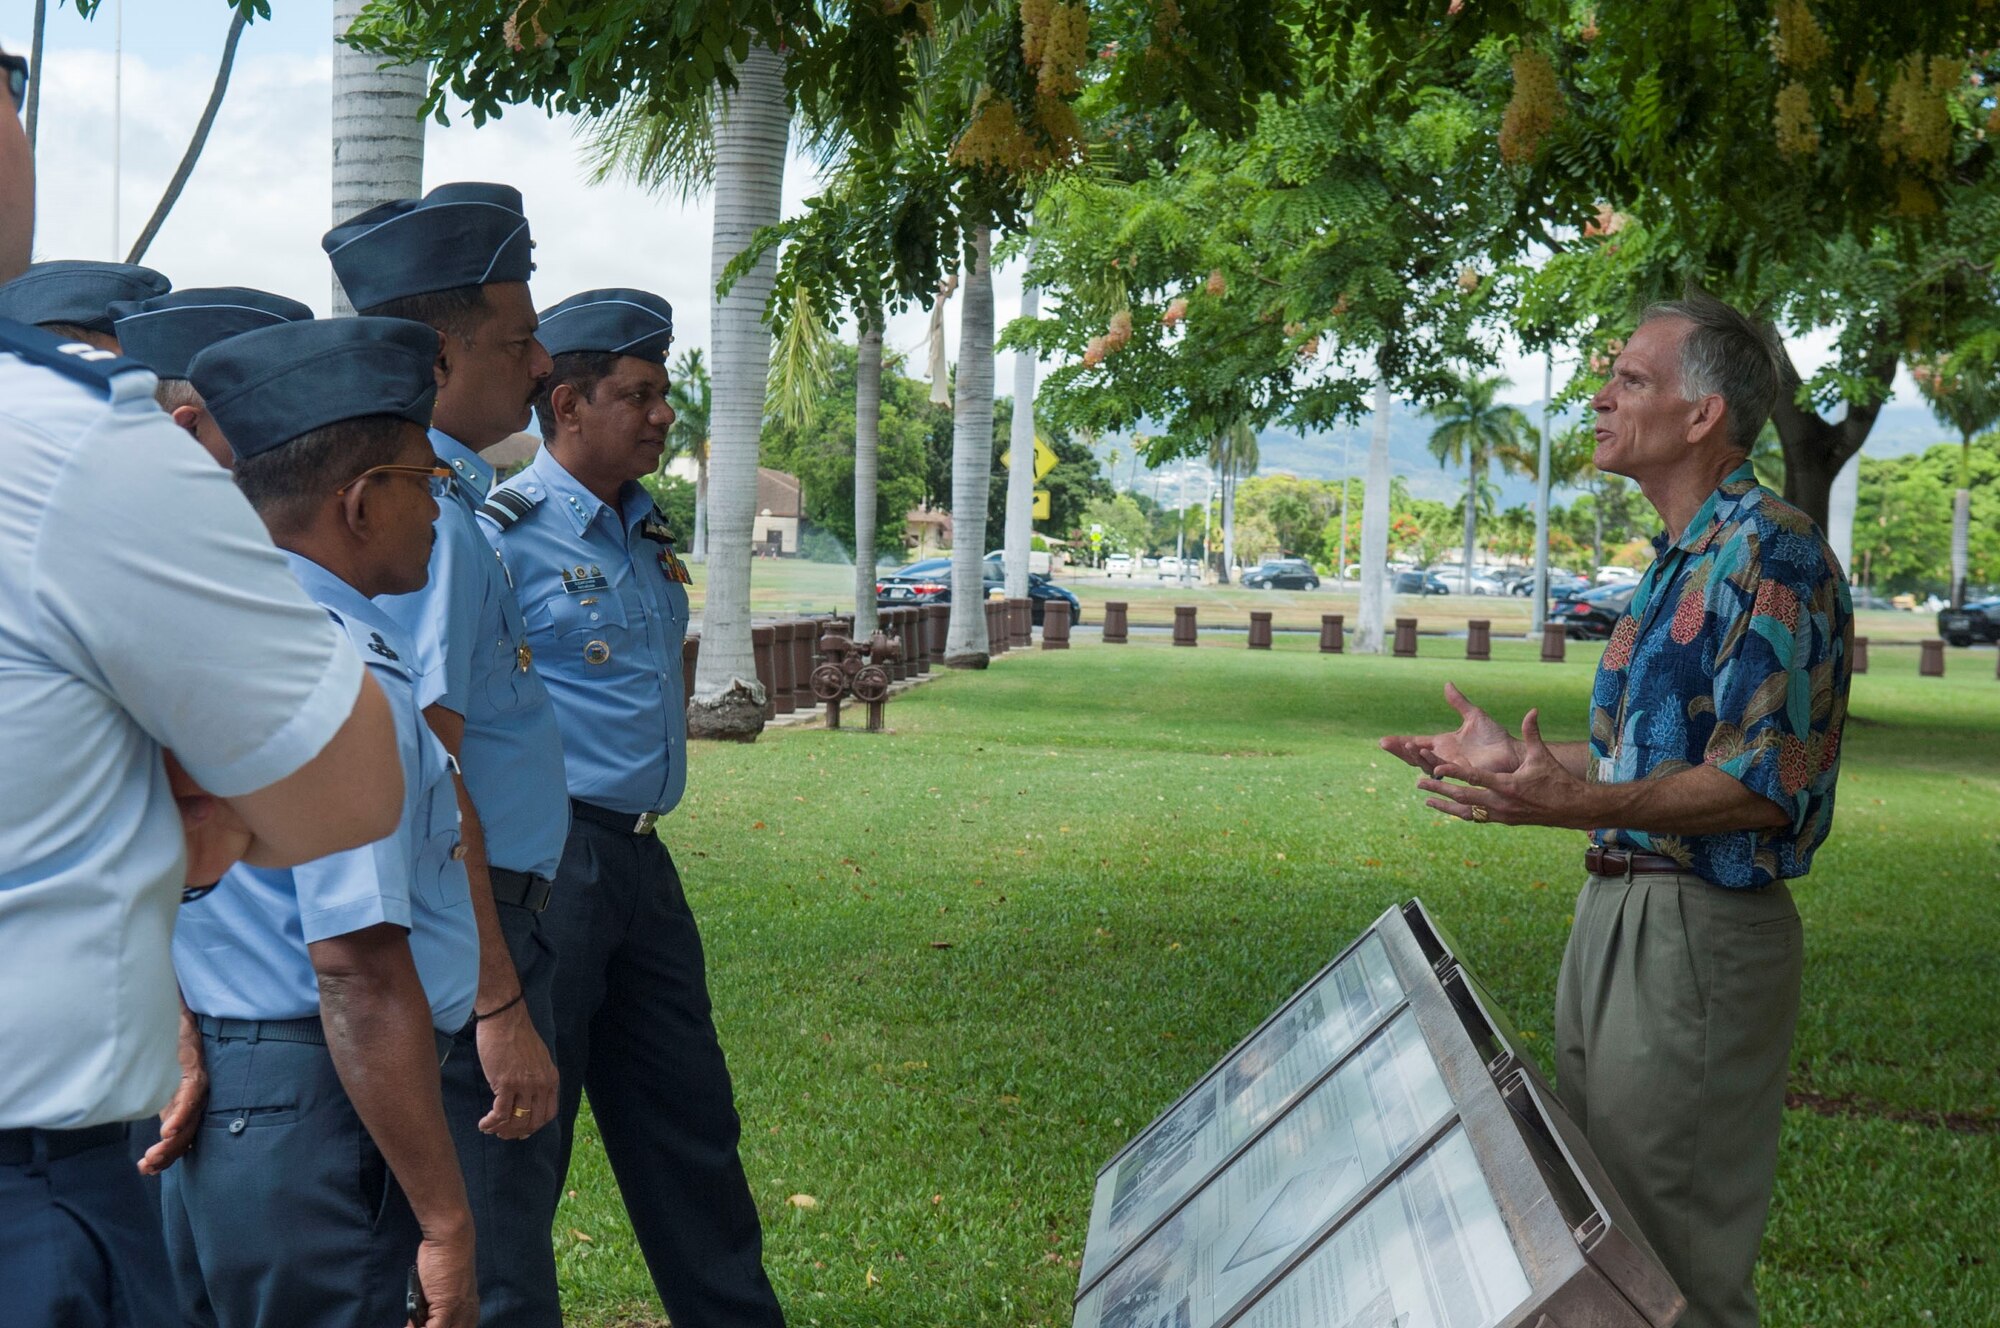 Charles Nicholls, Pacific Air Forces historian, gives a history tour to senior leaders of the Sri Lanka air force at Headquarters PACAF, Joint Base Pearl Harbor-Hickam, Hawaii, Aug. 22, 2019. During the four-day visit, SLAF and U.S. Air Force senior leaders engaged in three different working groups; humanitarian assistance and disaster relief, air and maritime domain awareness, and force development. (U.S. Air Force photo by Staff Sgt. Mikaley Kline)